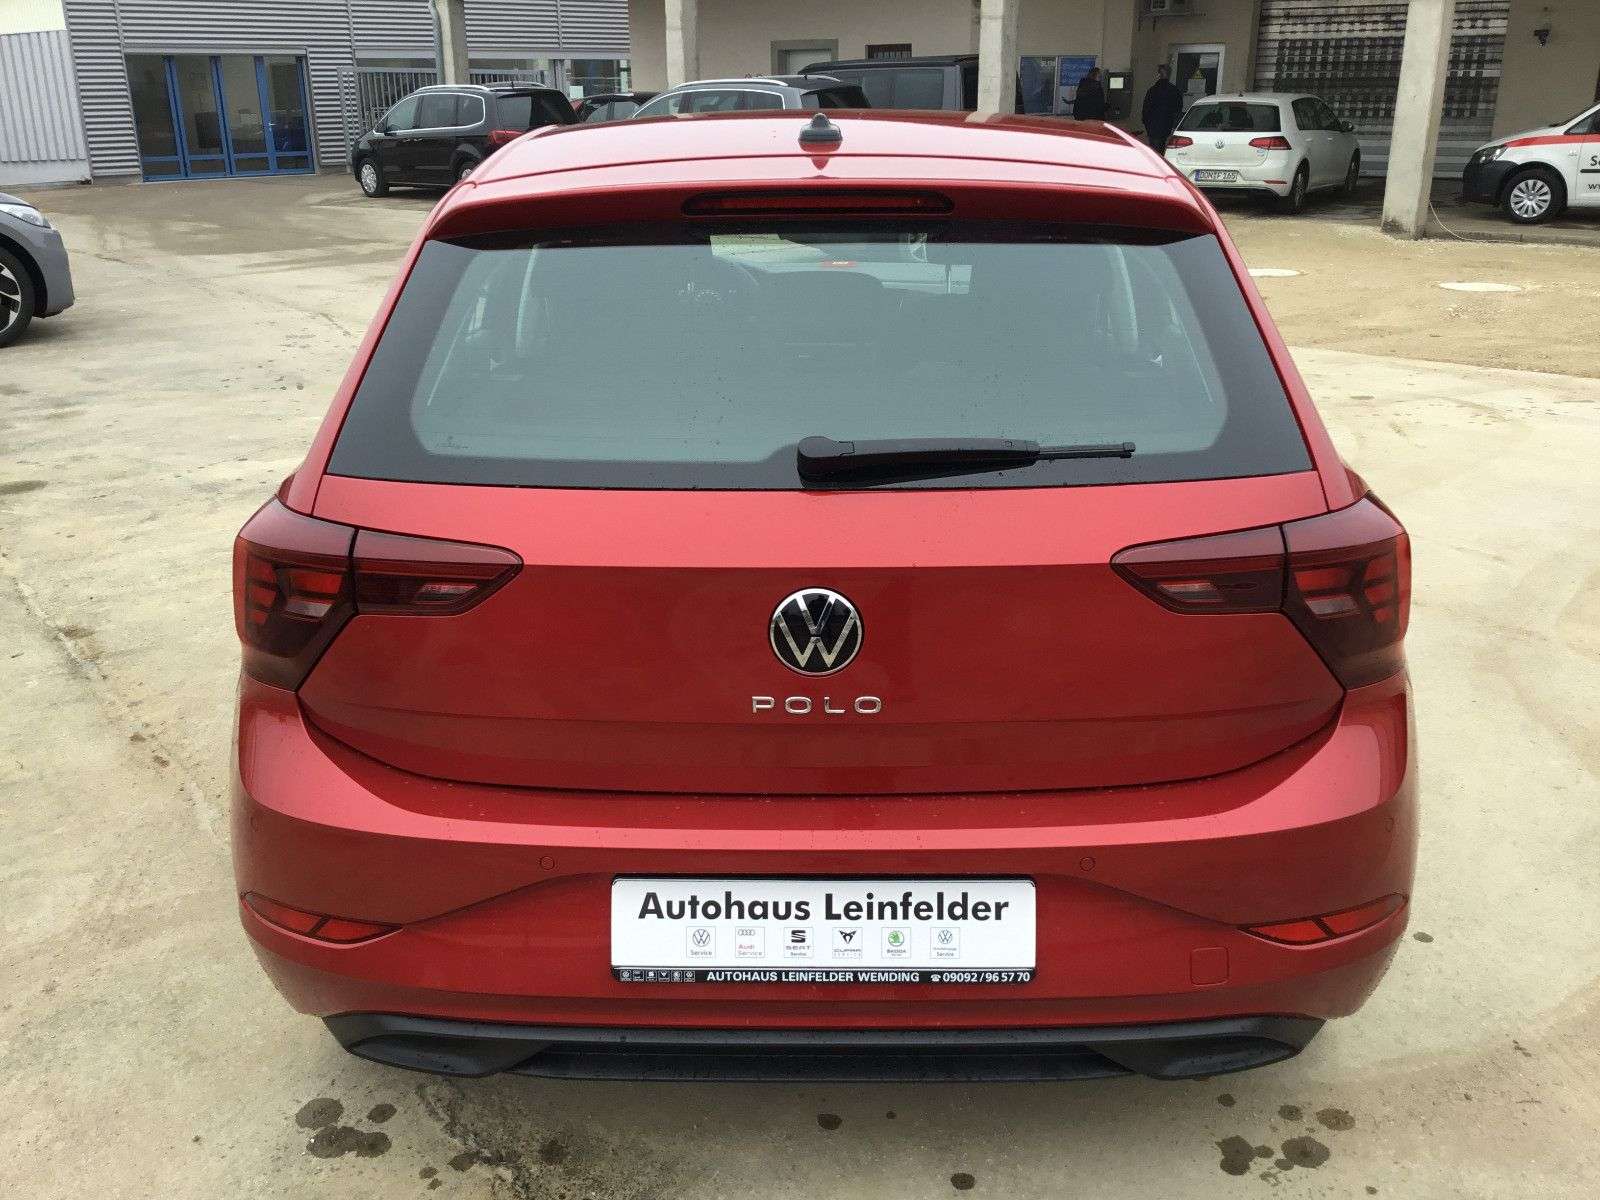 Volkswagen Polo Compact in Red pre-registered in Wemding for € 21,990.-